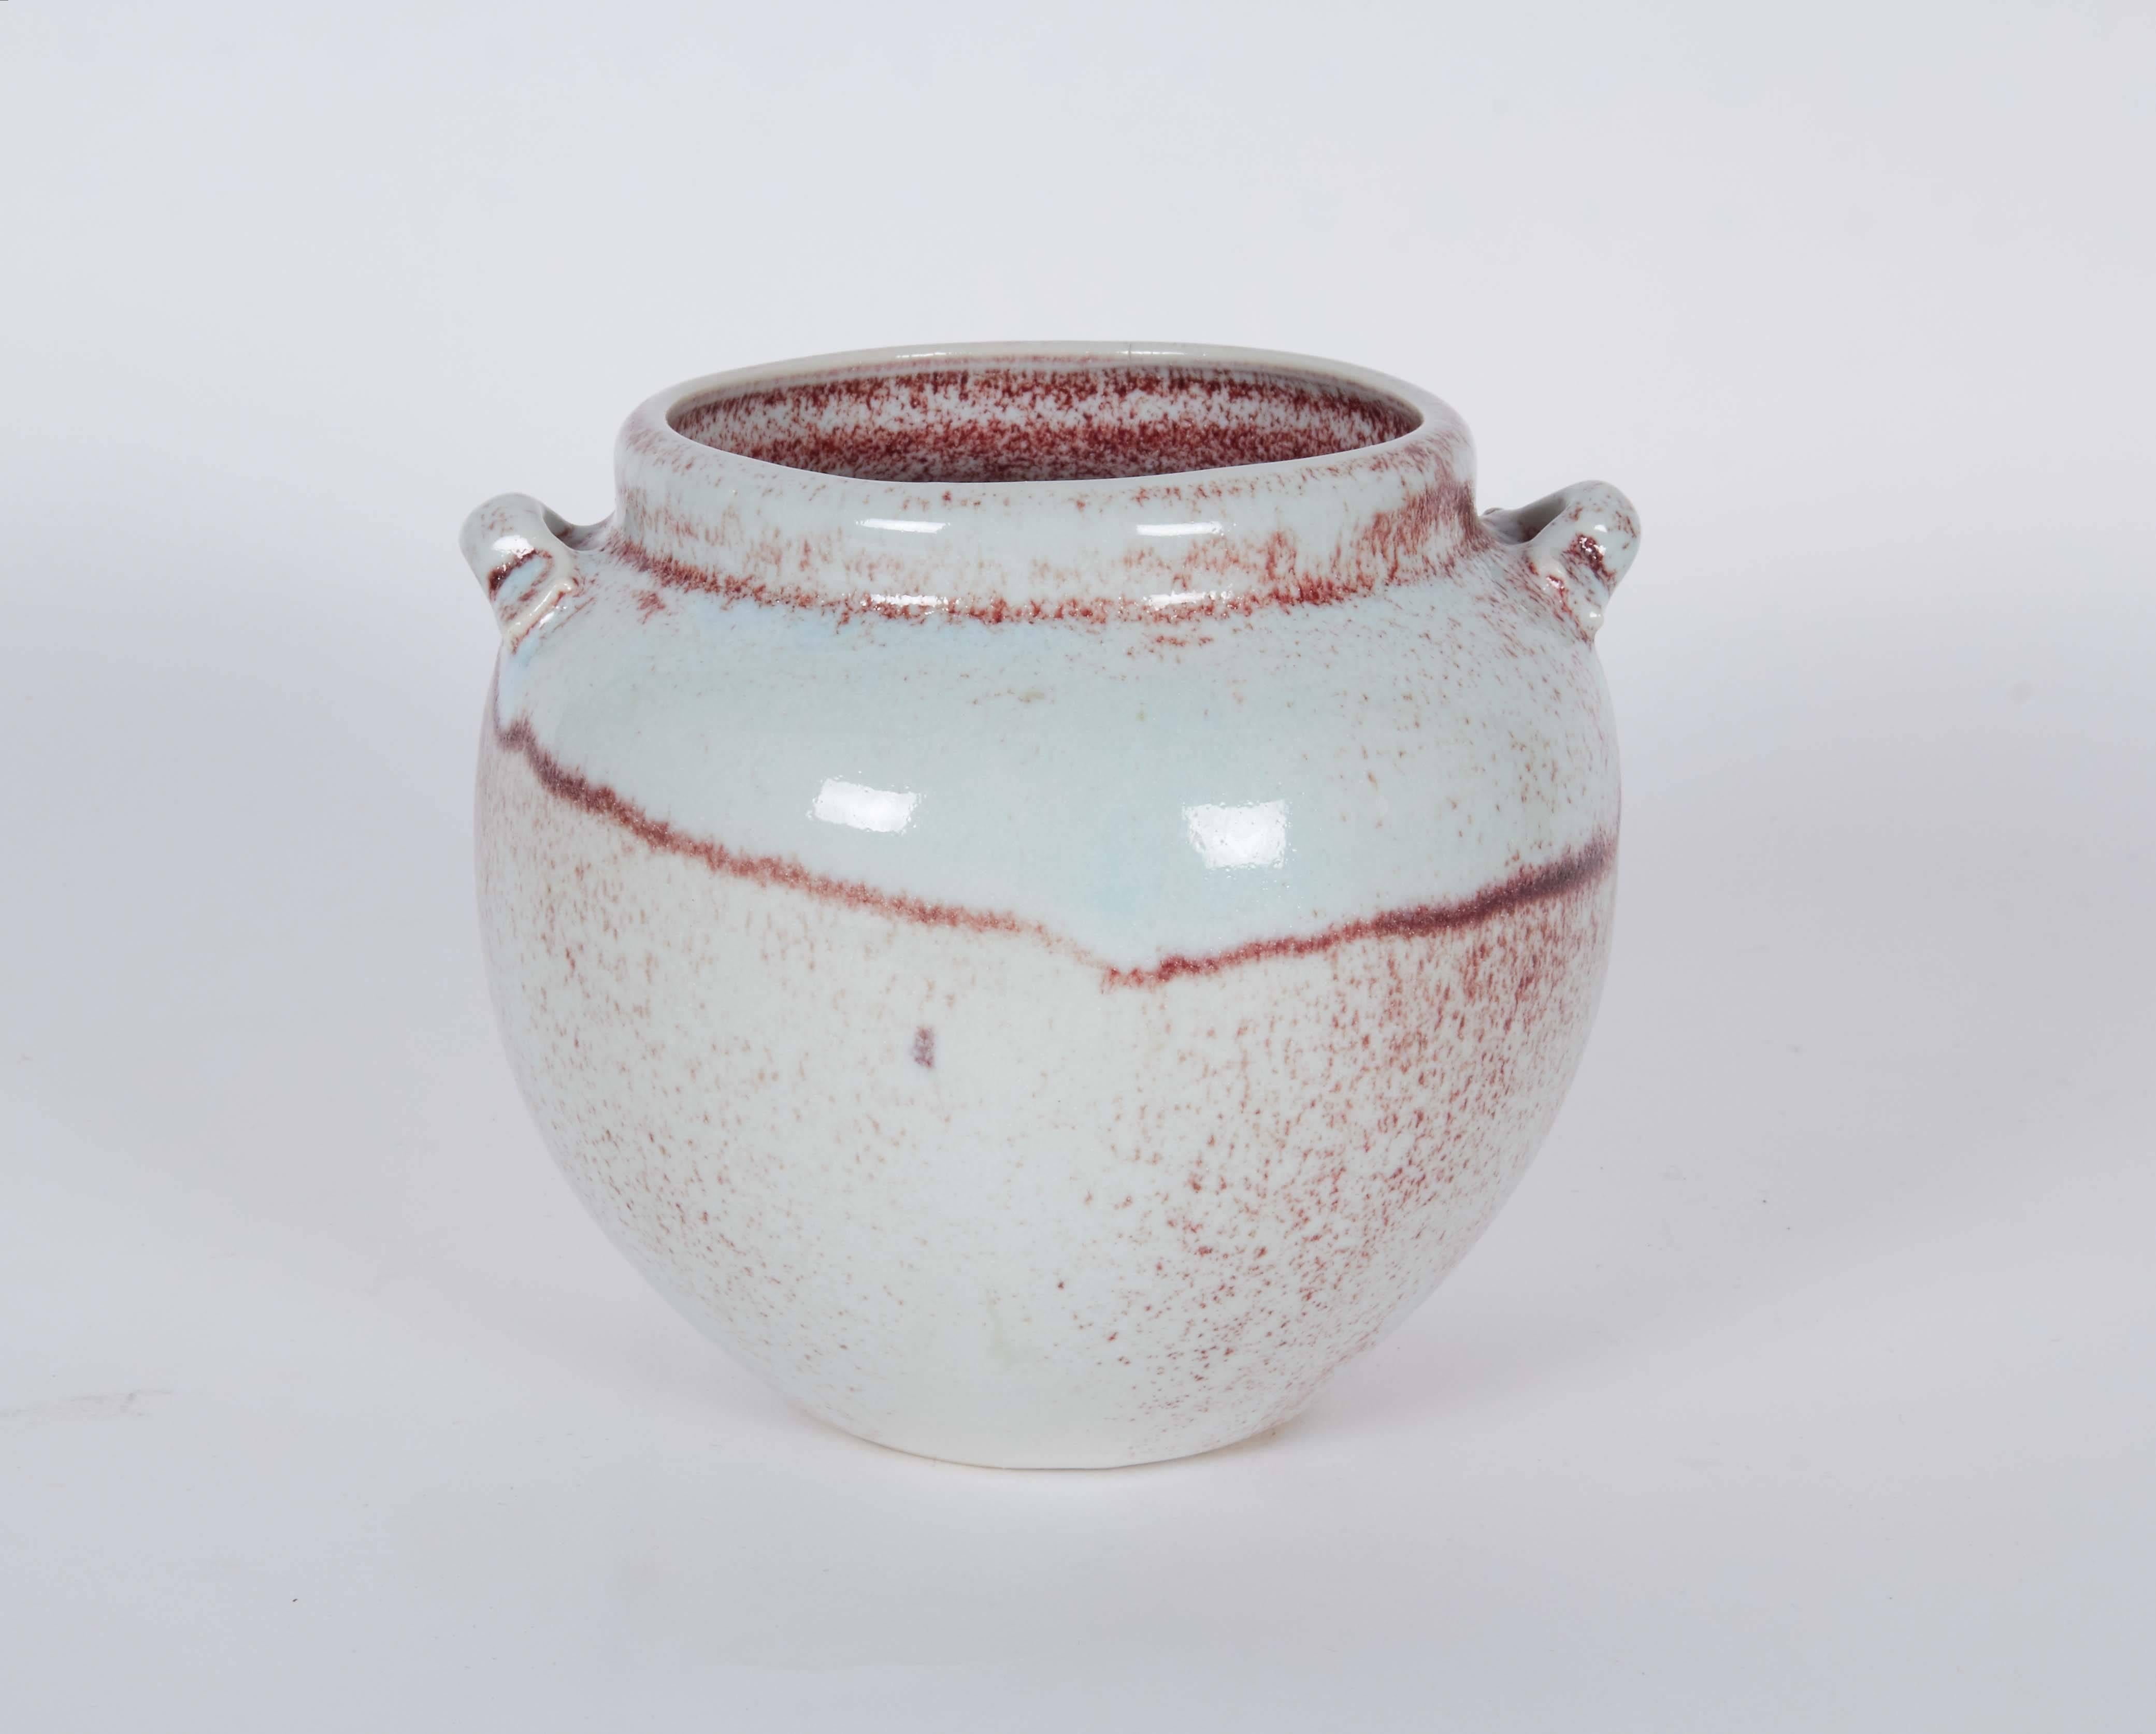 A ceramic handled urn by contemporary ceramic artist Ron Dier, the round body with white and pink glazes. Markings include [H] [Dier] signed to the base.

10480